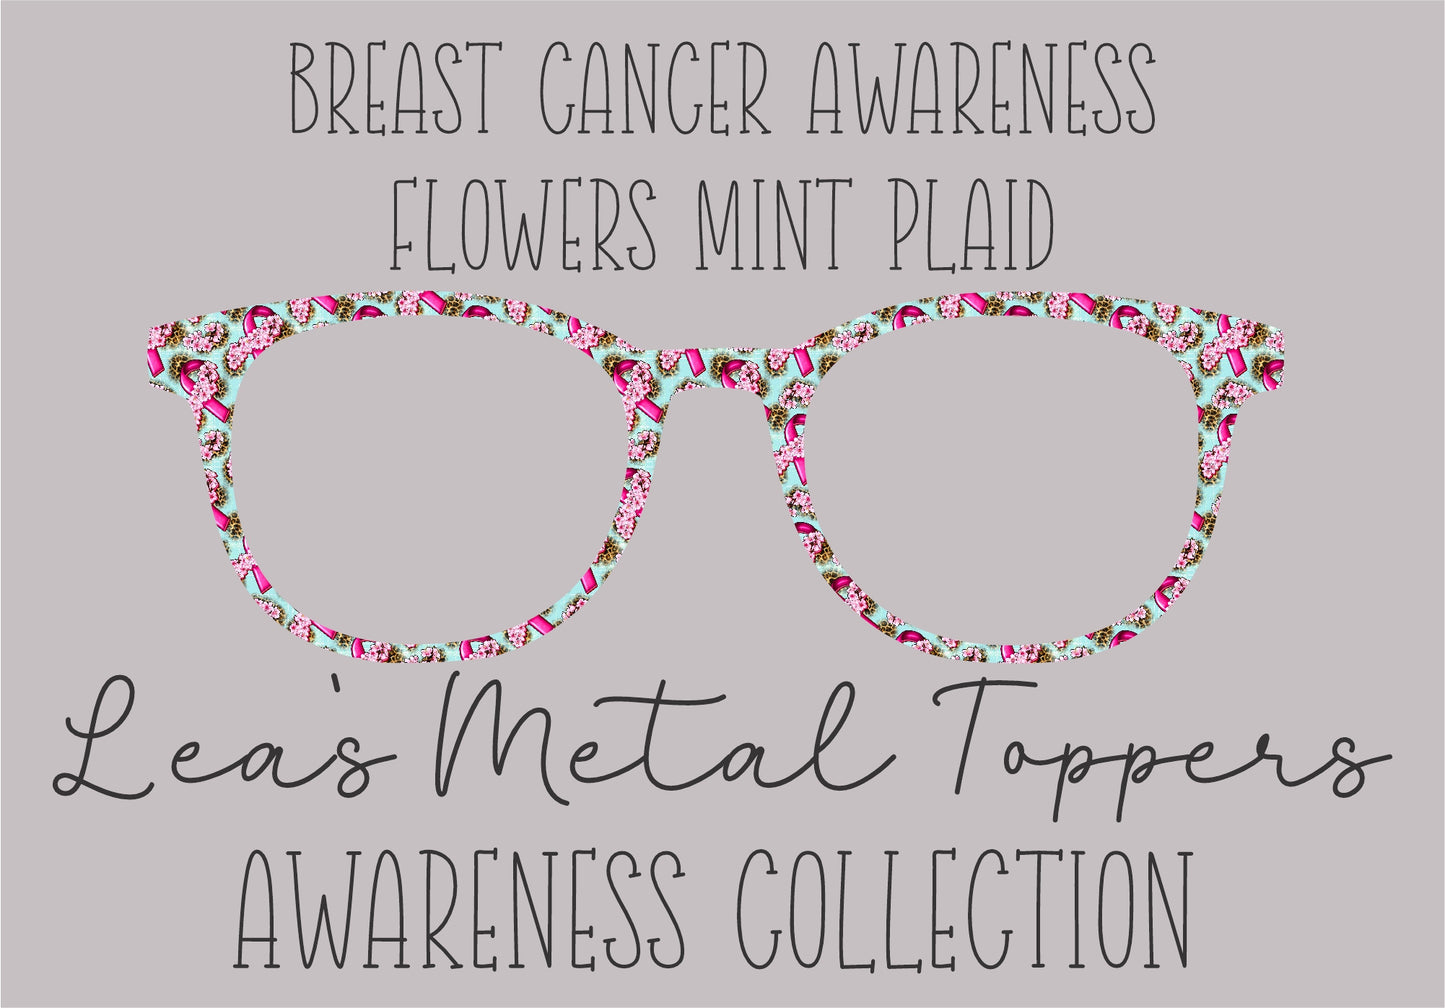 BREAST CANCER AWARNESS FLOWERS MINT PLAID Eyewear Frame Toppers COMES WITH MAGNETS